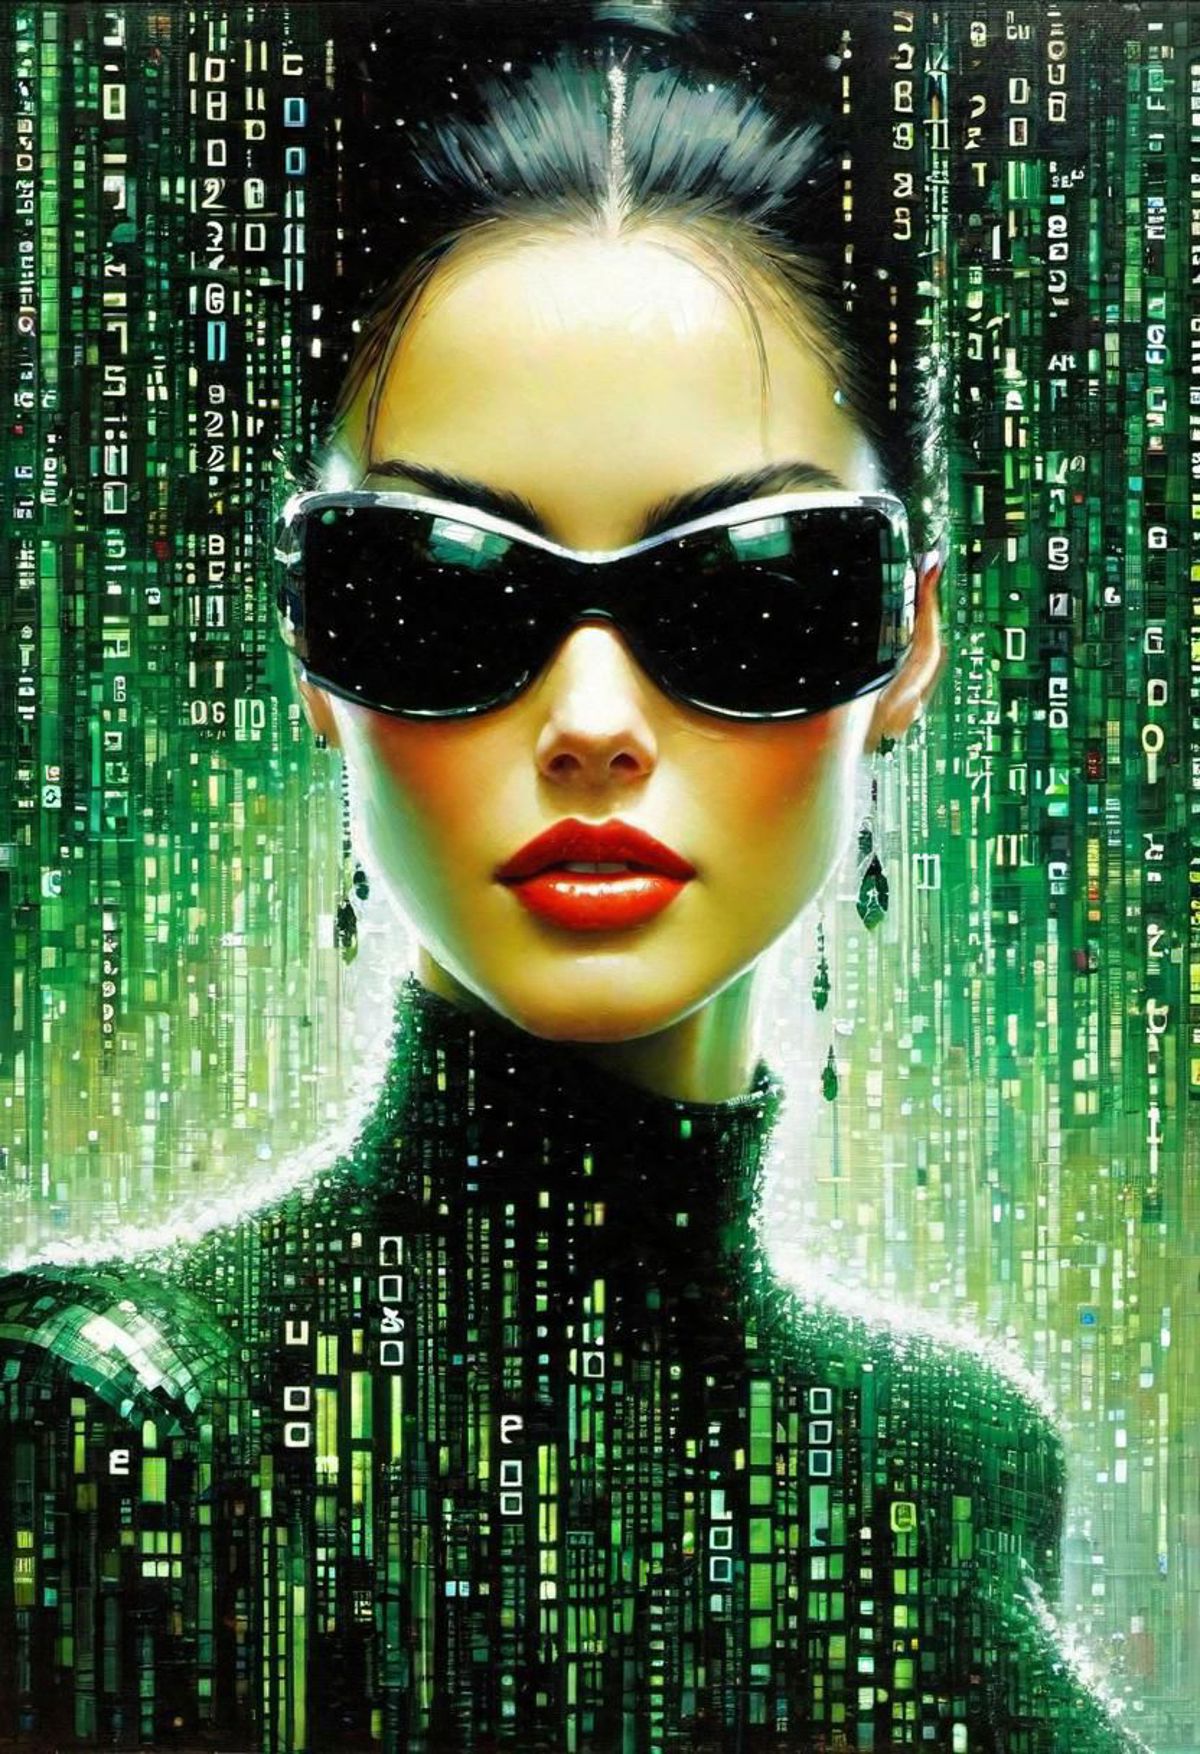 A woman with dark hair, wearing sunglasses and a black dress, posing in front of a backdrop of green computer code.